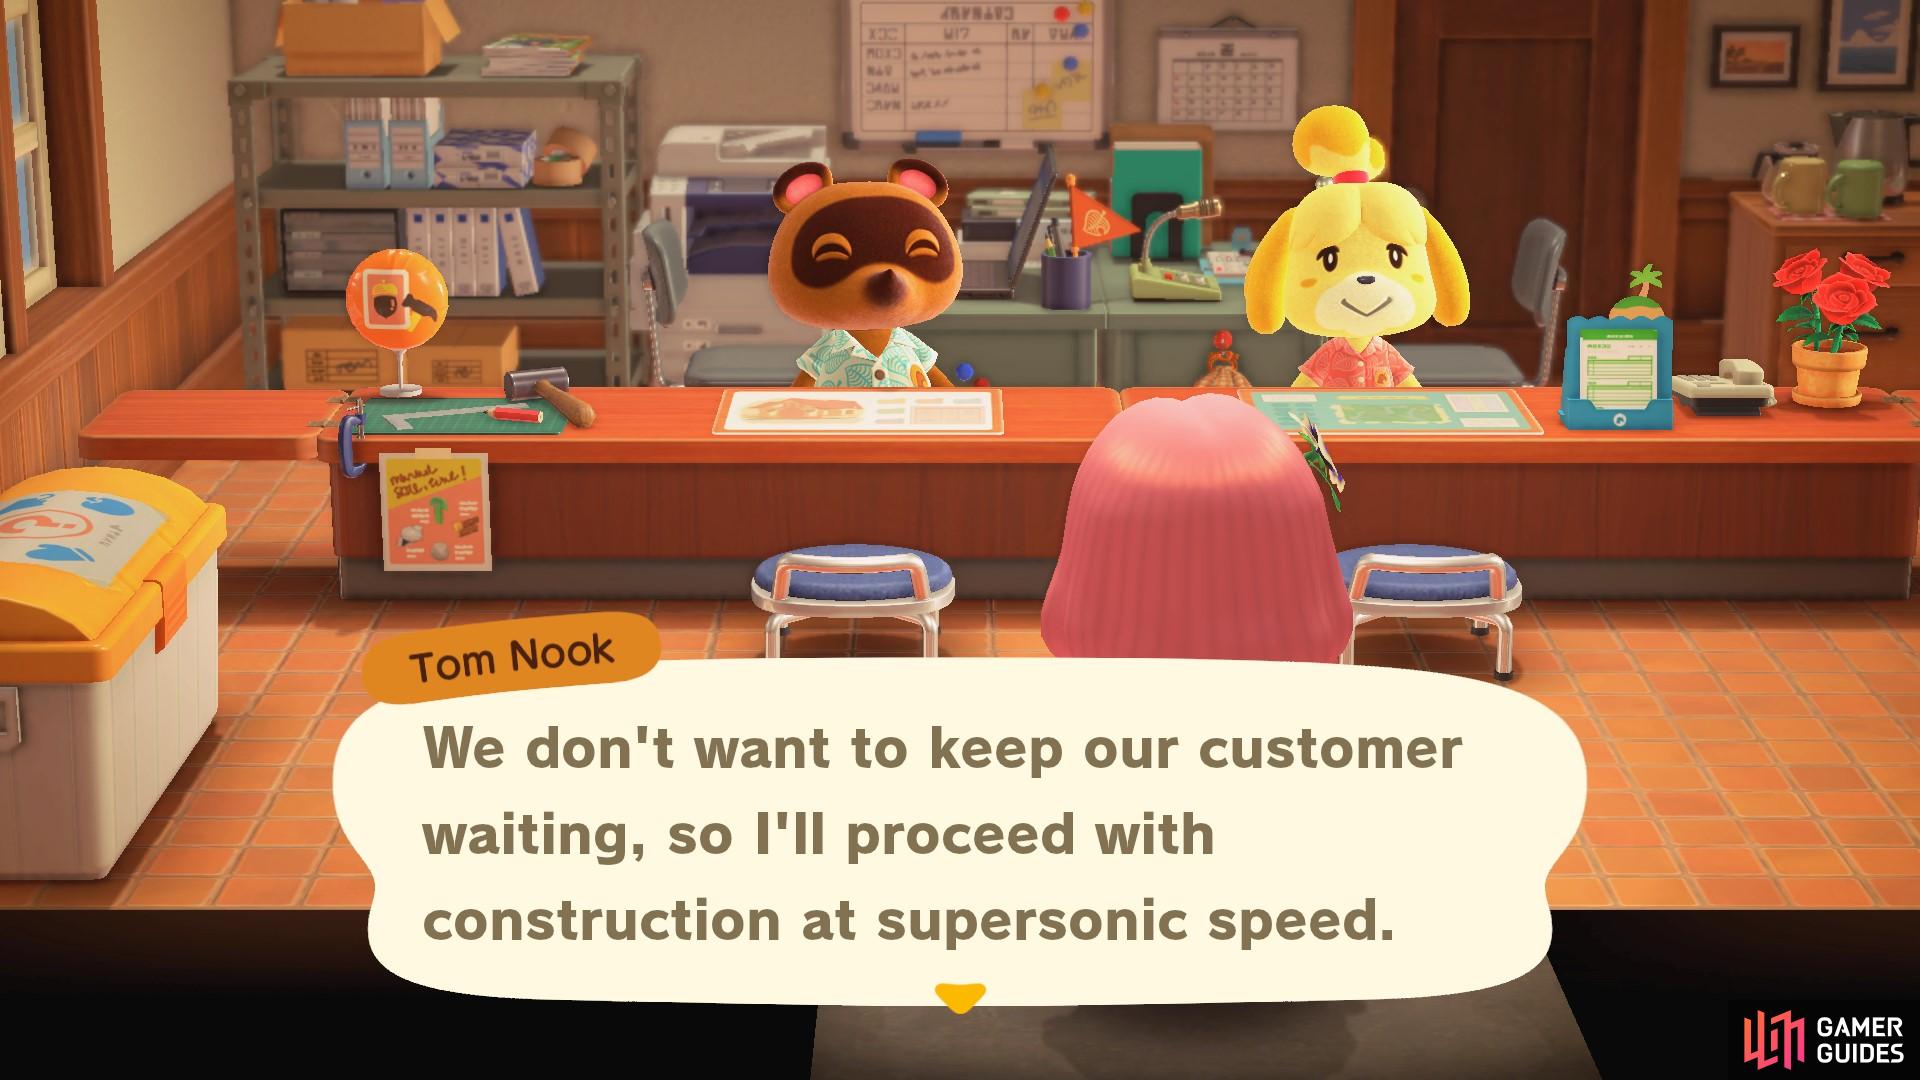 Tom Nook will get on building the house straight away